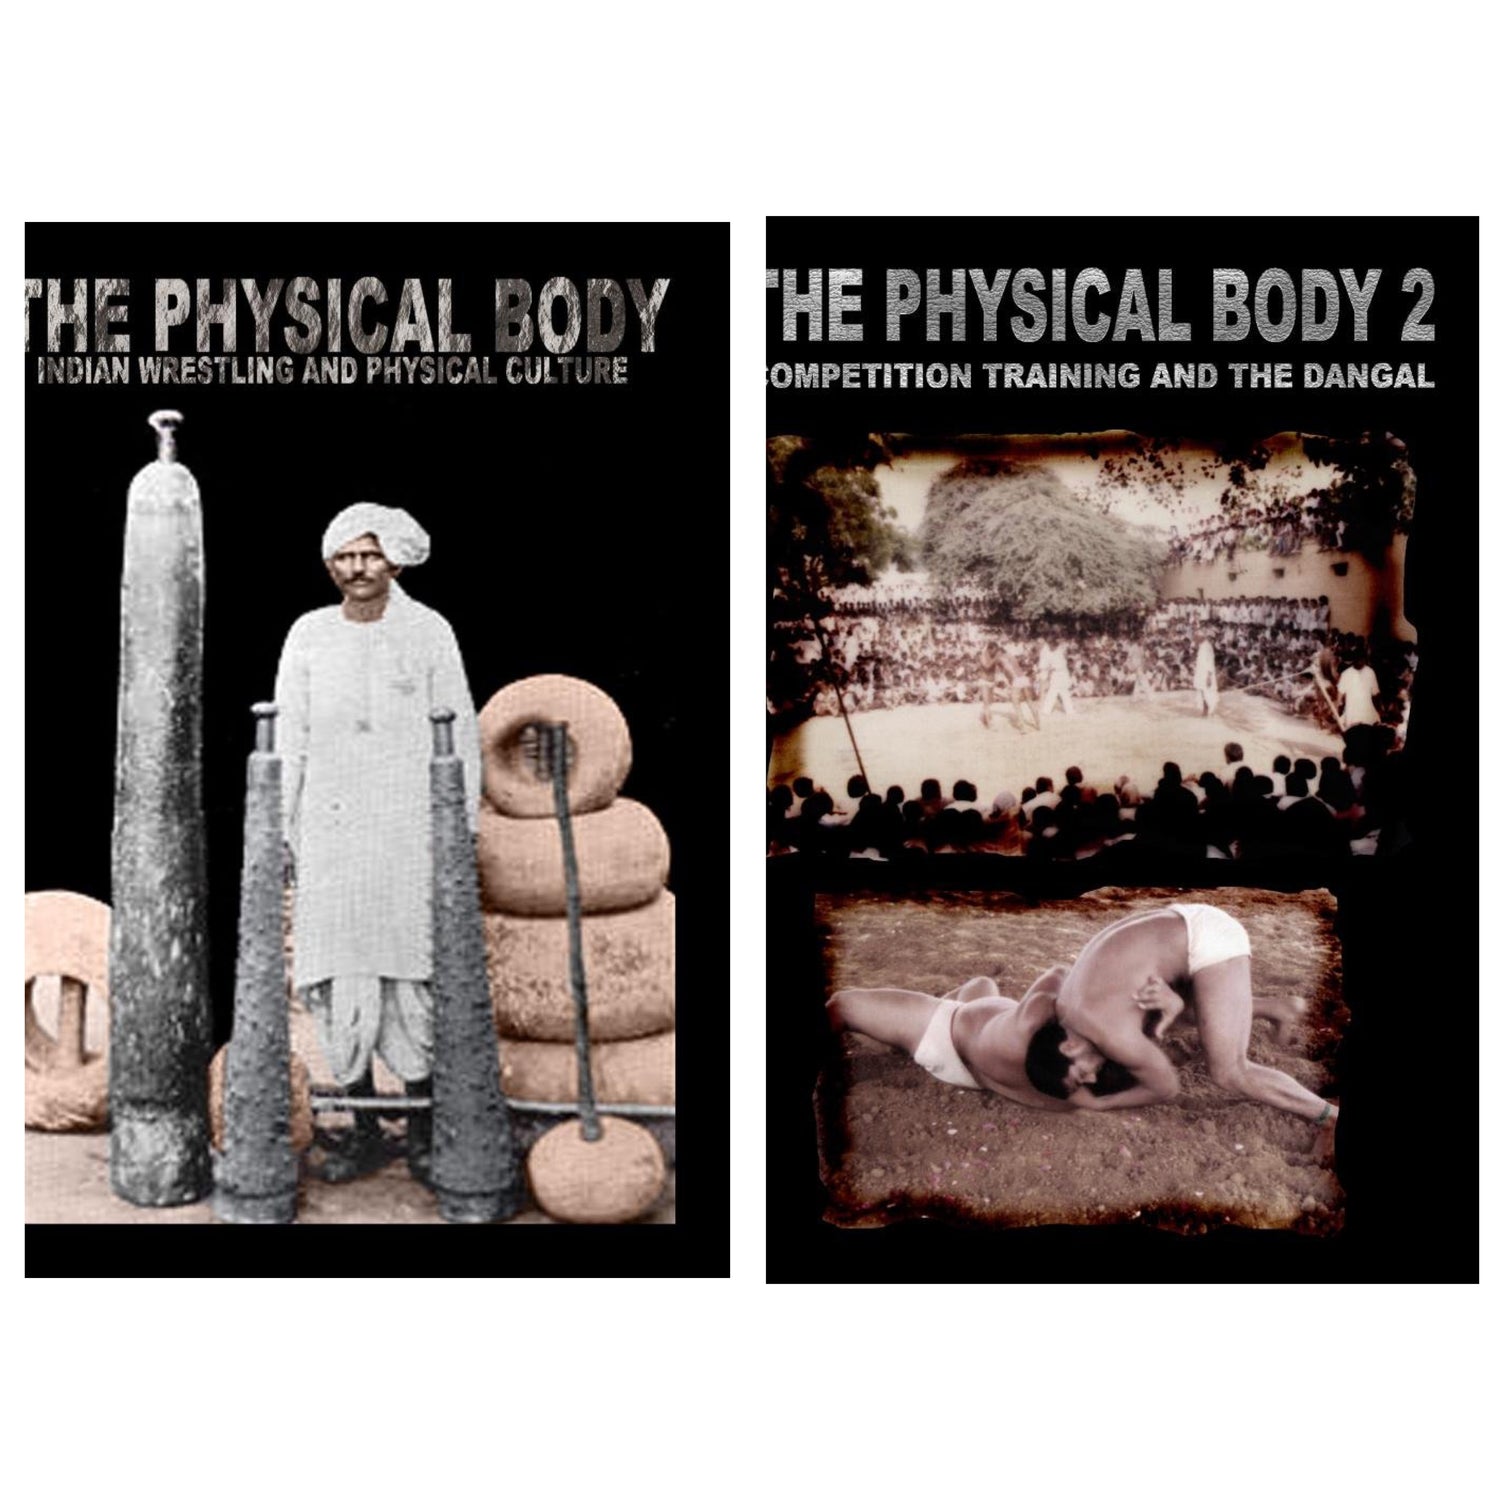 The Physical Body 1 & 2: Indian Wrestling & Fitness Documentary DVD Set (Preowned)